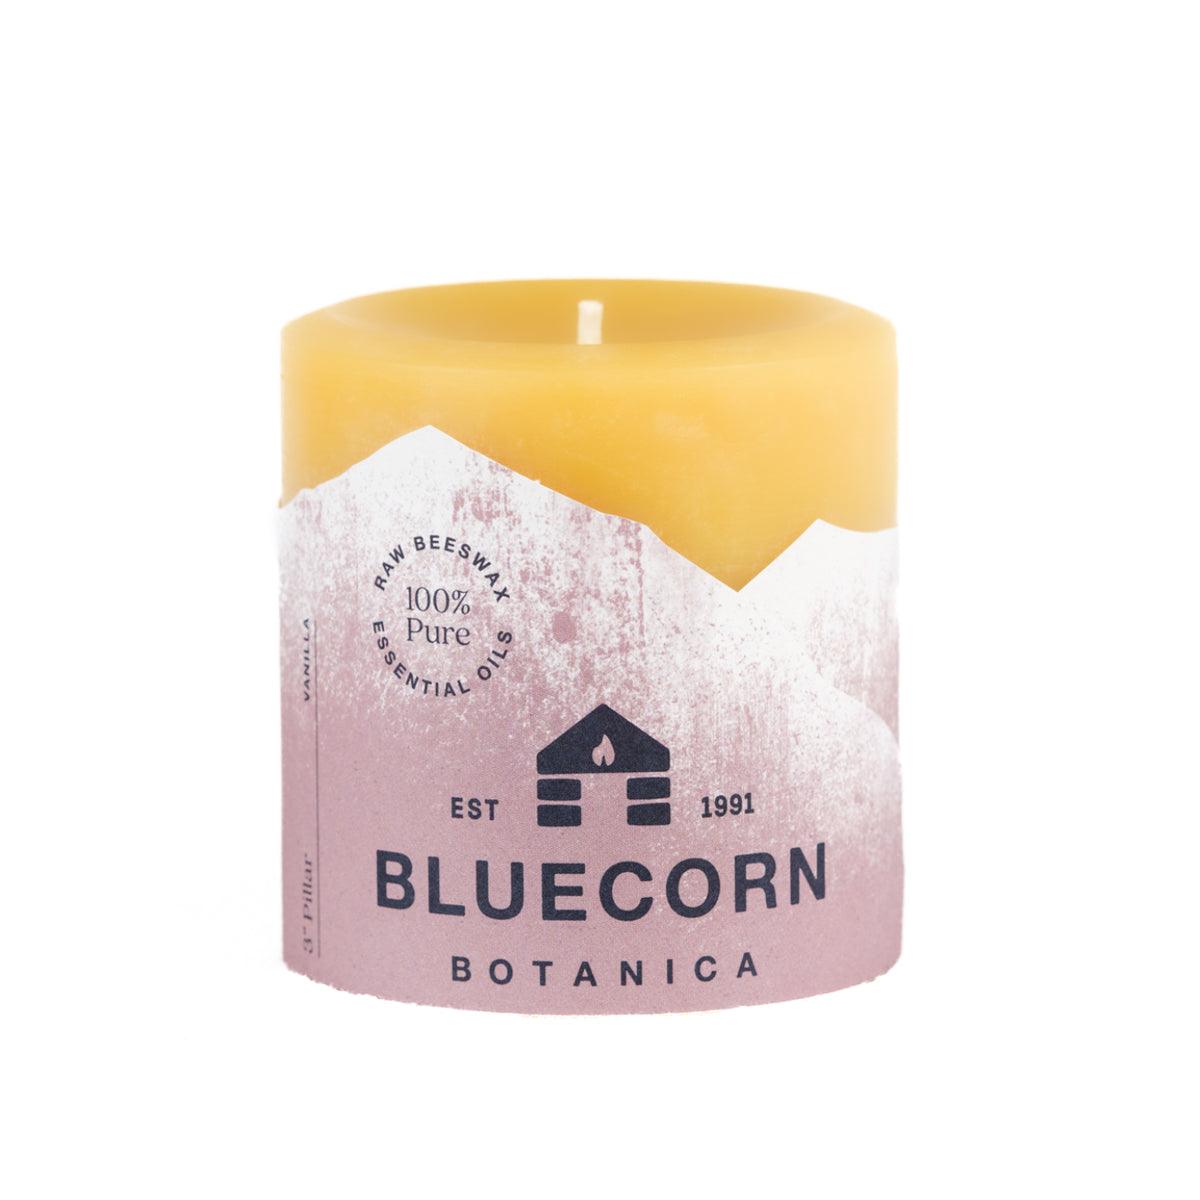  Cypress & Sandalwood Essential Oil & Pure Beeswax Candle in  Blown Glass Vessel. Bluecorn Beeswax Botanica. Non-Toxic Scented Candle in  100% Recycled Glass. 8 oz. : Home & Kitchen